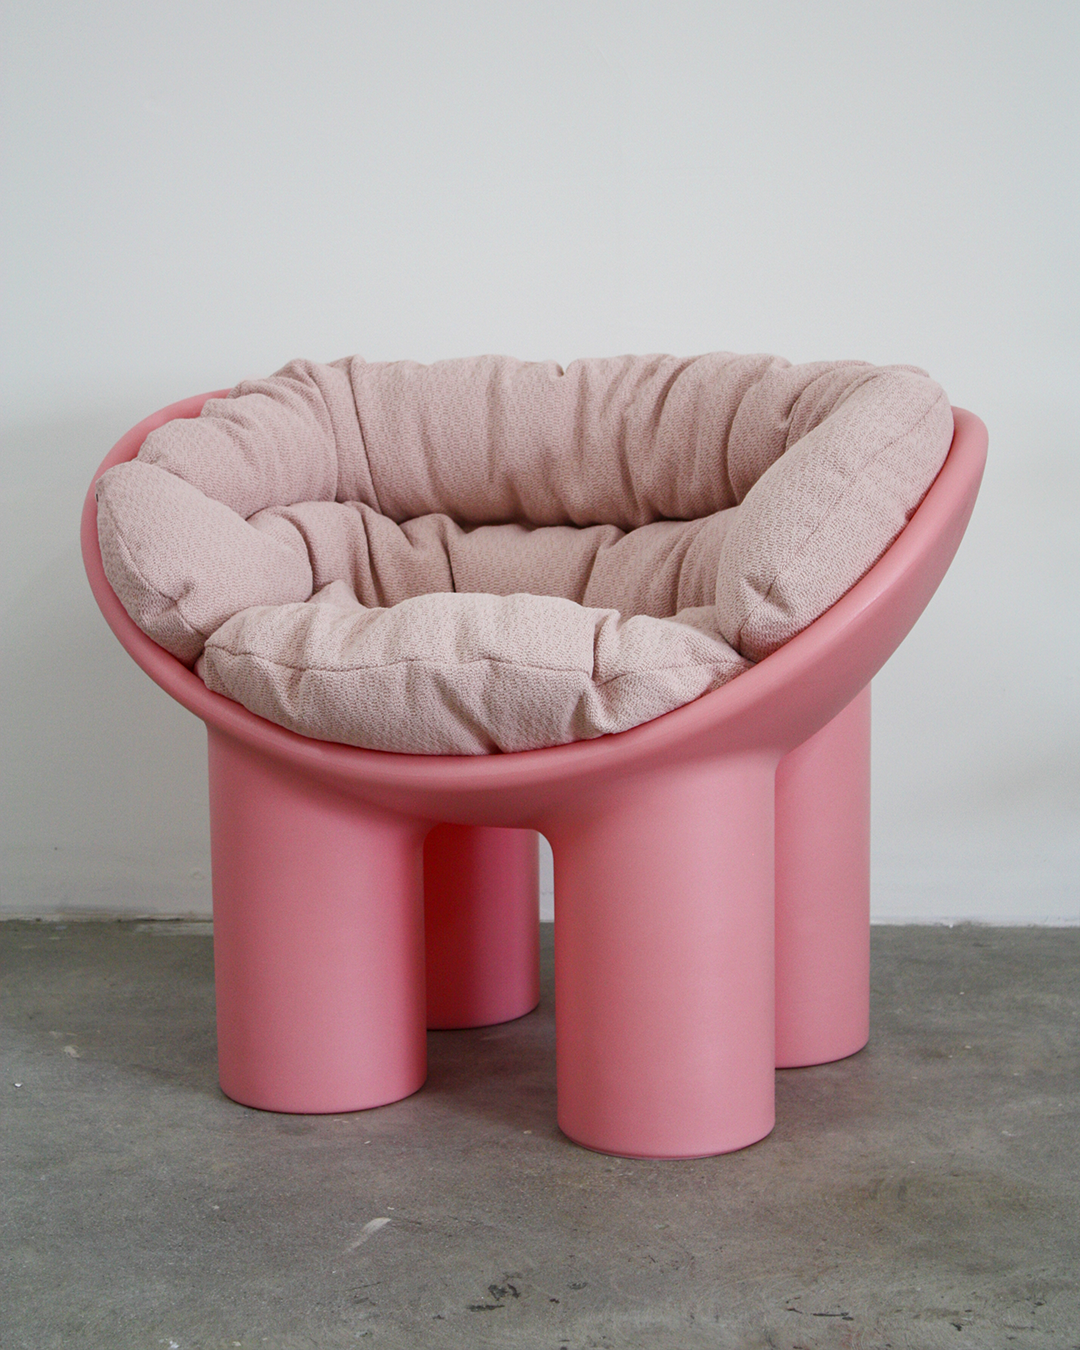 Roly Poly Chair Dupe Cushion